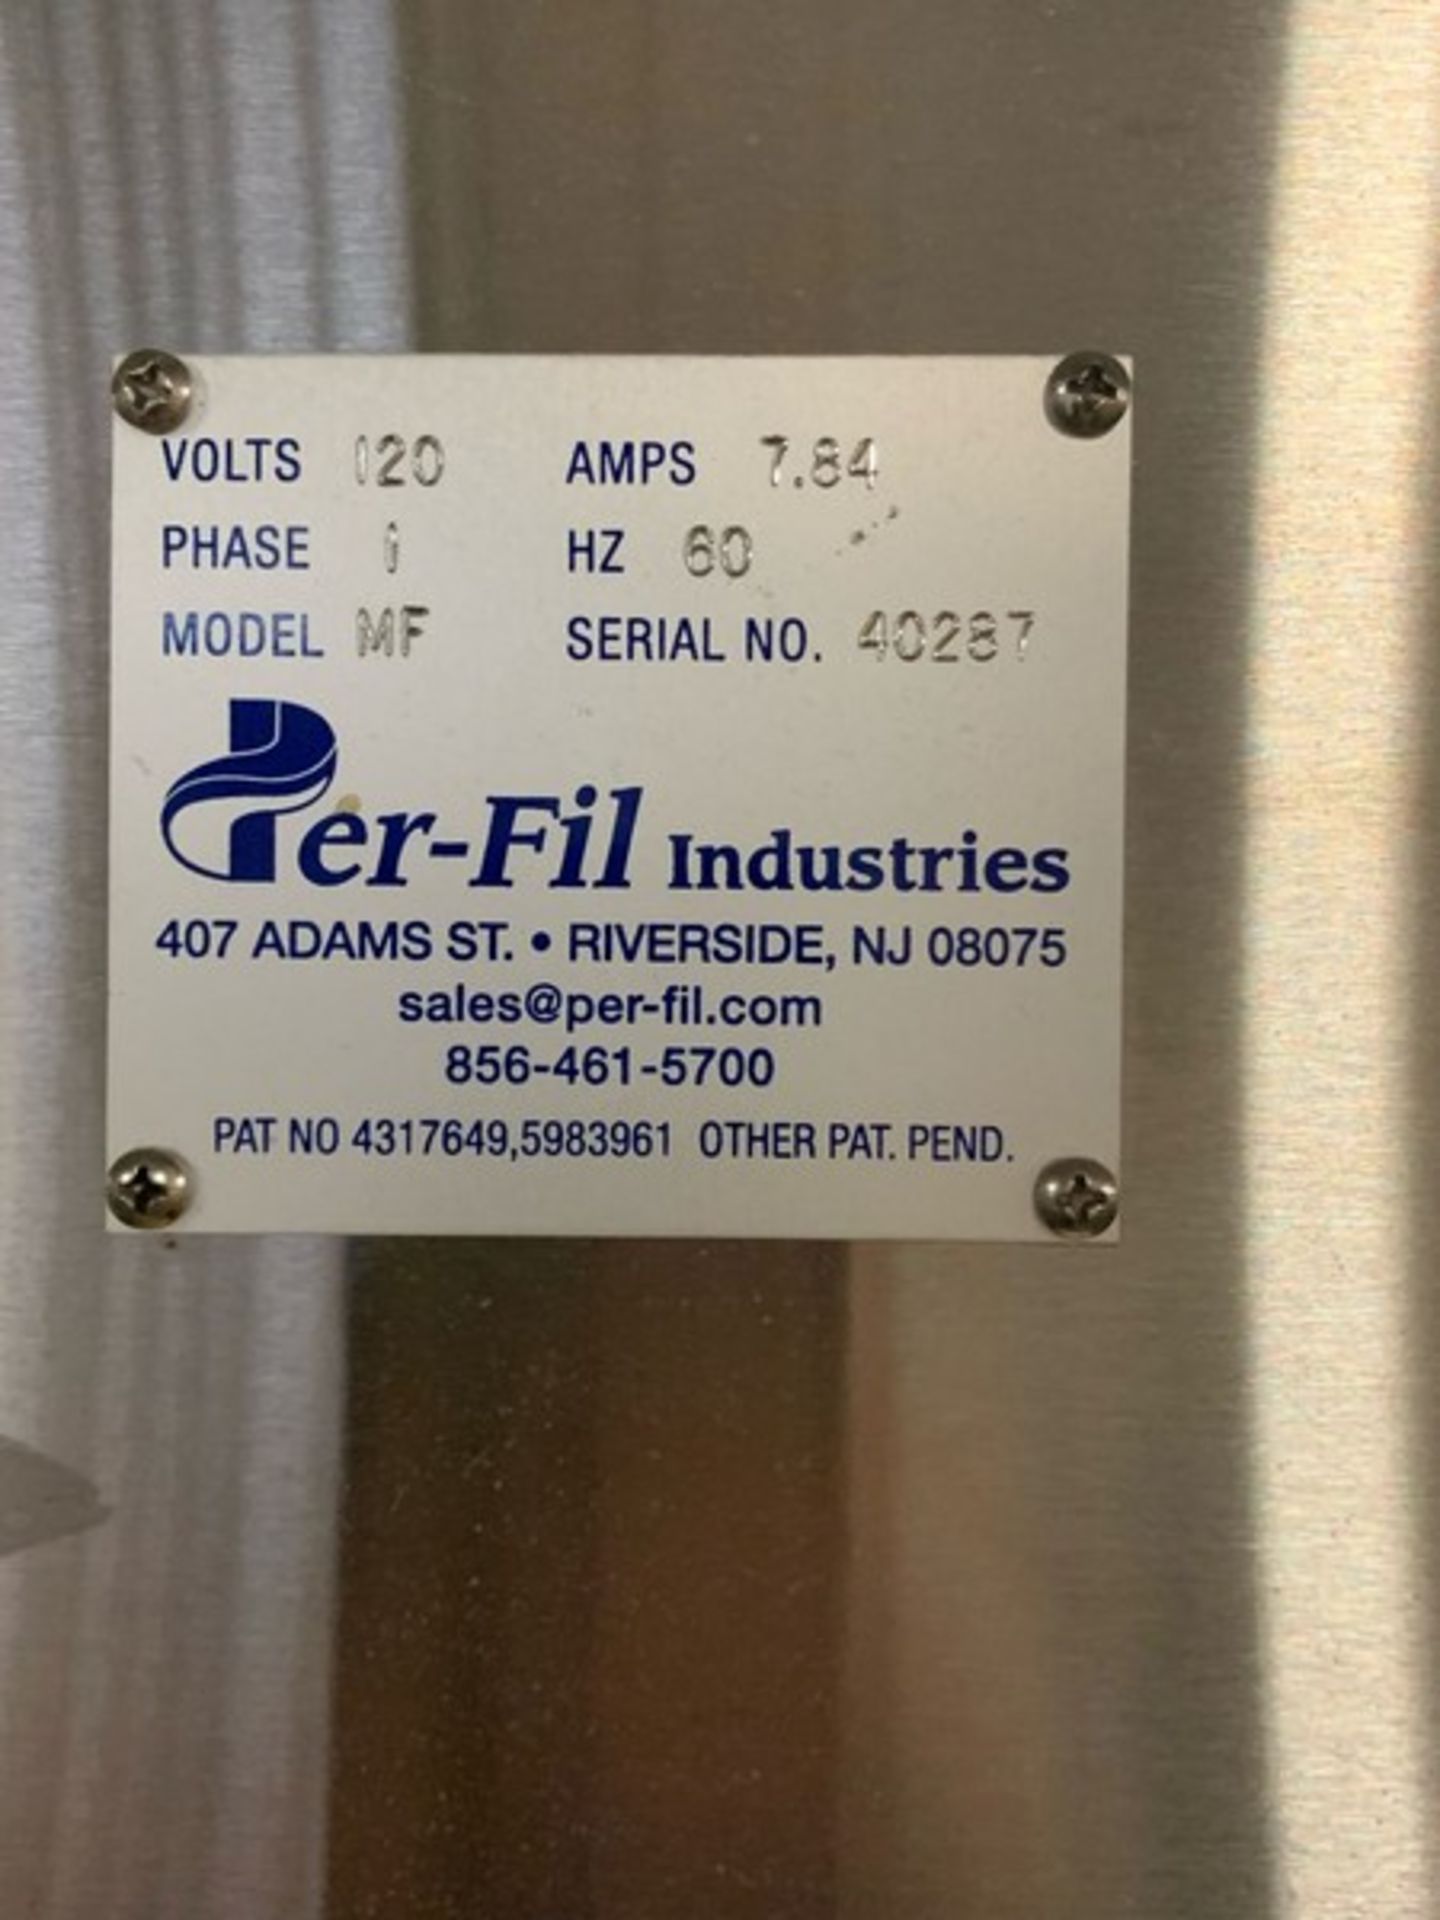 PerFil Semi-Automatic Powder Filler. Model MF, Serial: 40287, 120 Volts, 1 Phase, 60 Hz. As shown in - Image 6 of 6